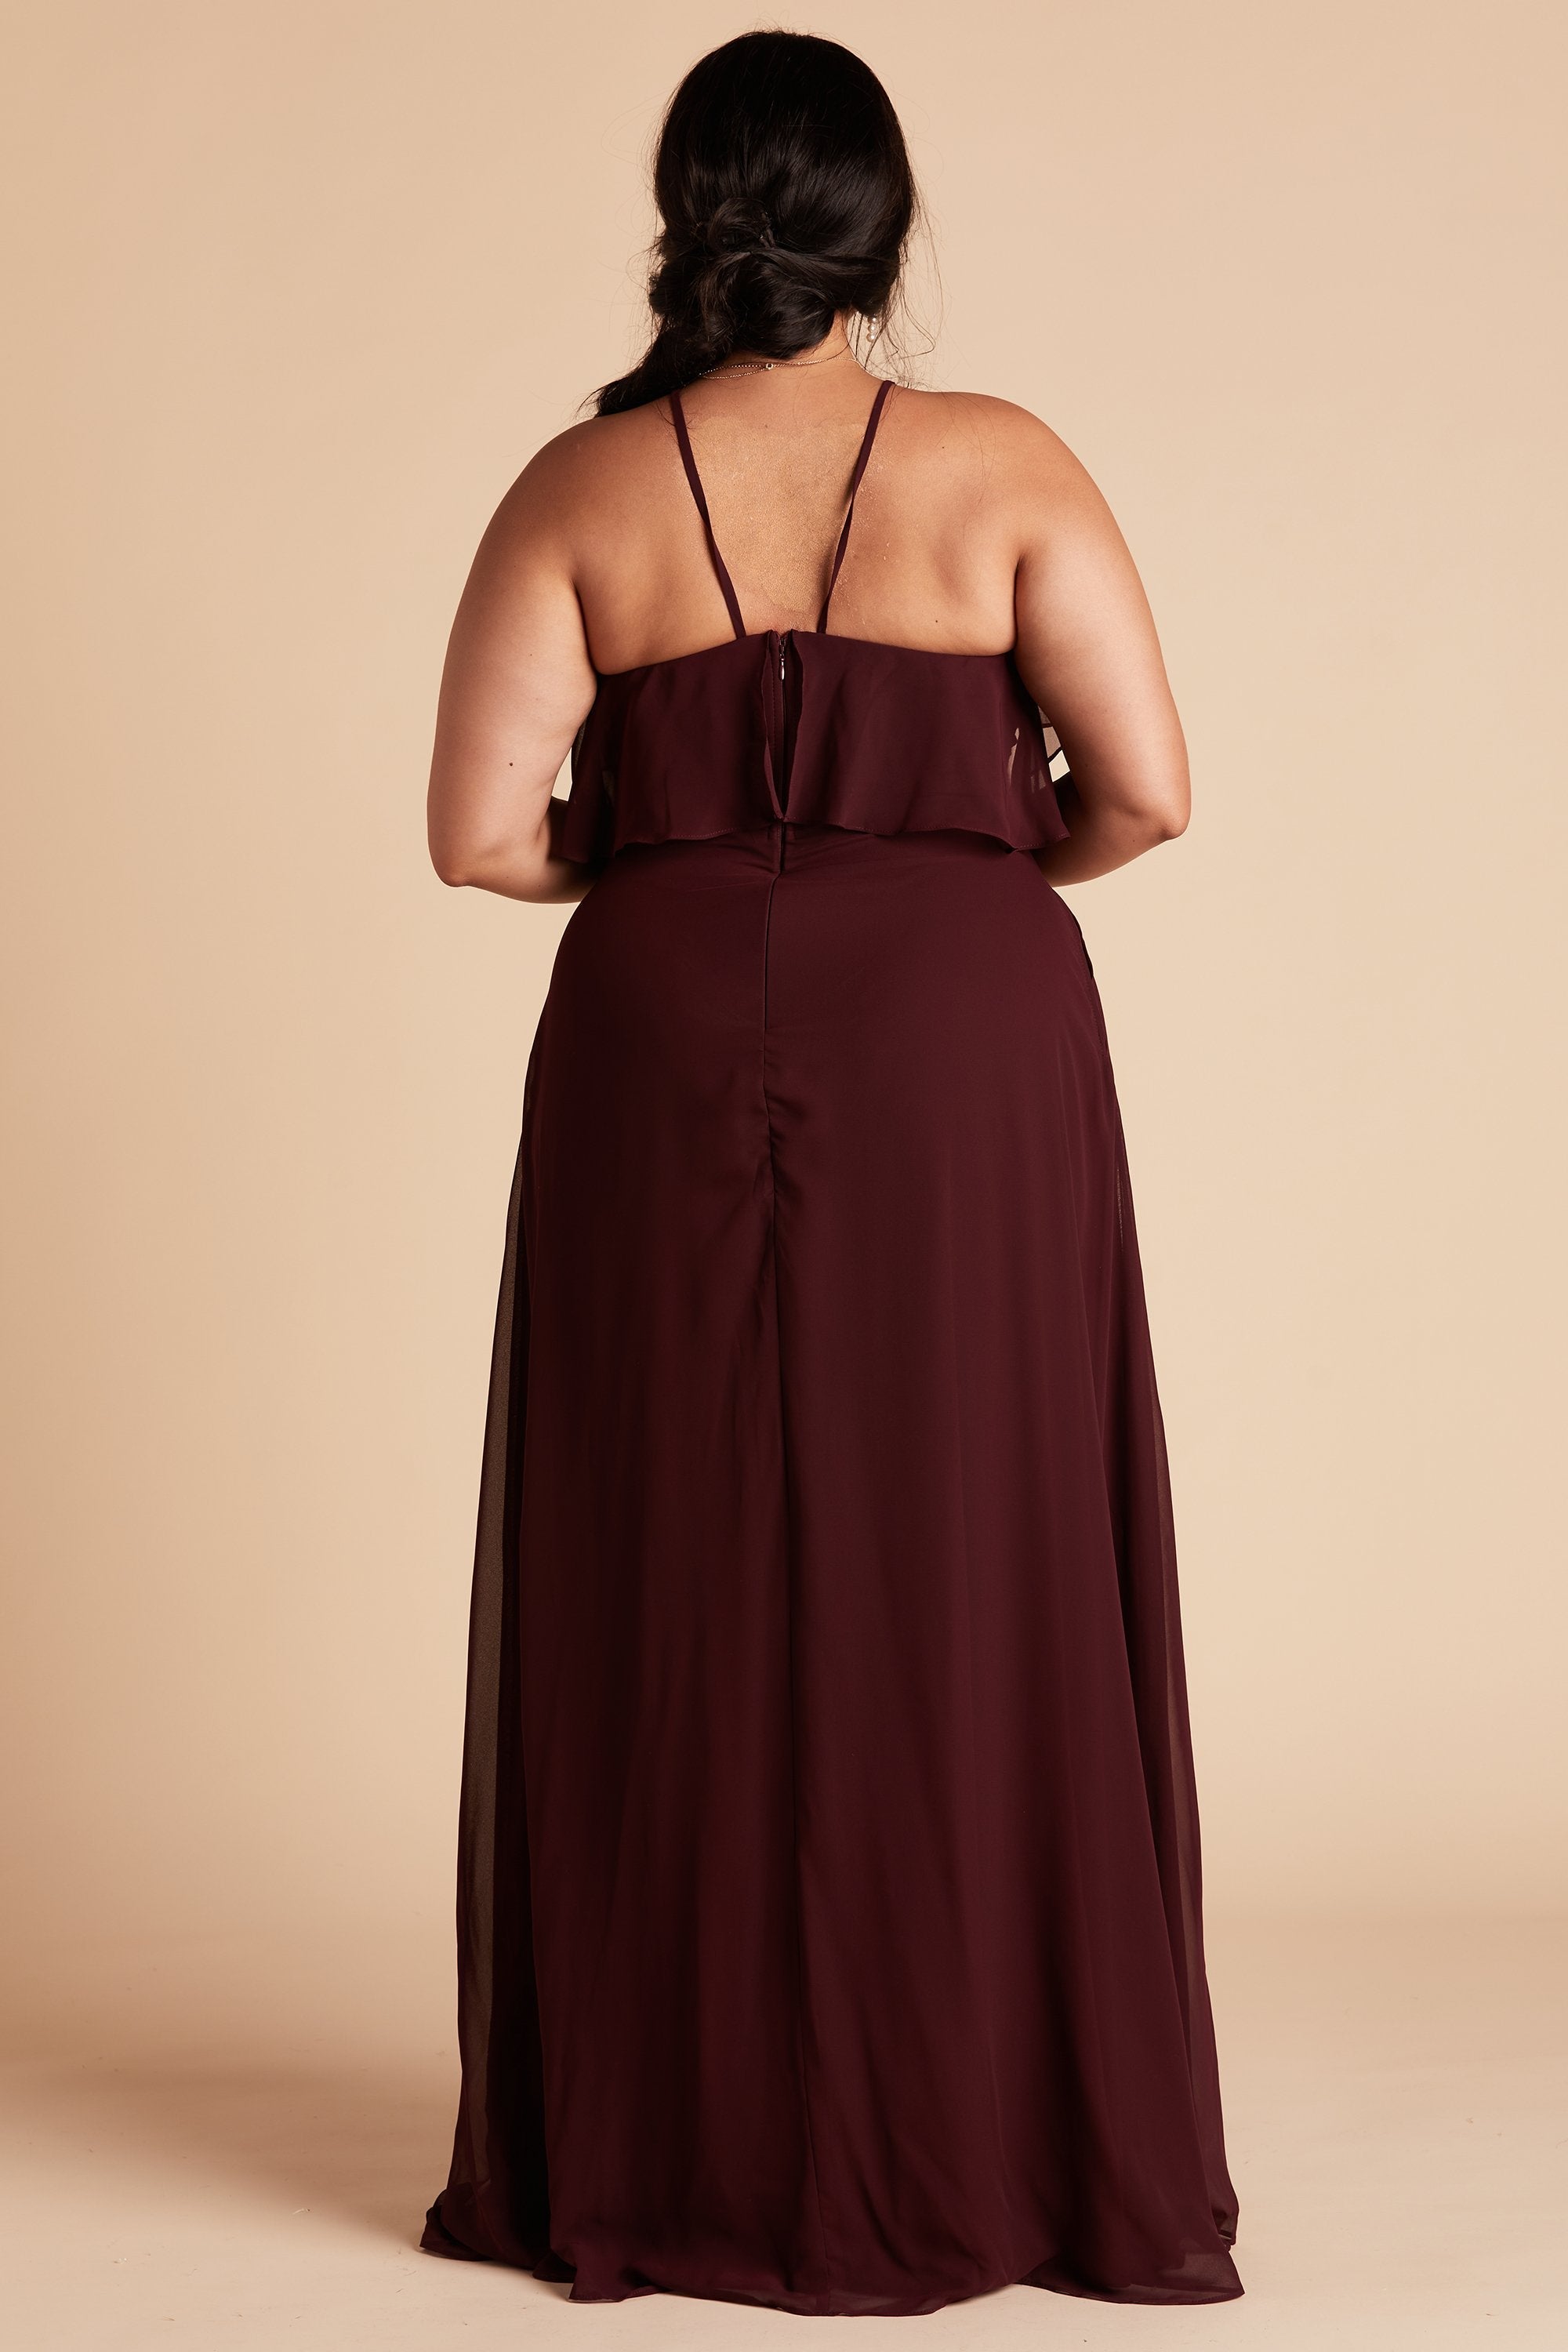 Jules plus size bridesmaid dress in cabernet burgundy chiffon by Birdy Grey, back view